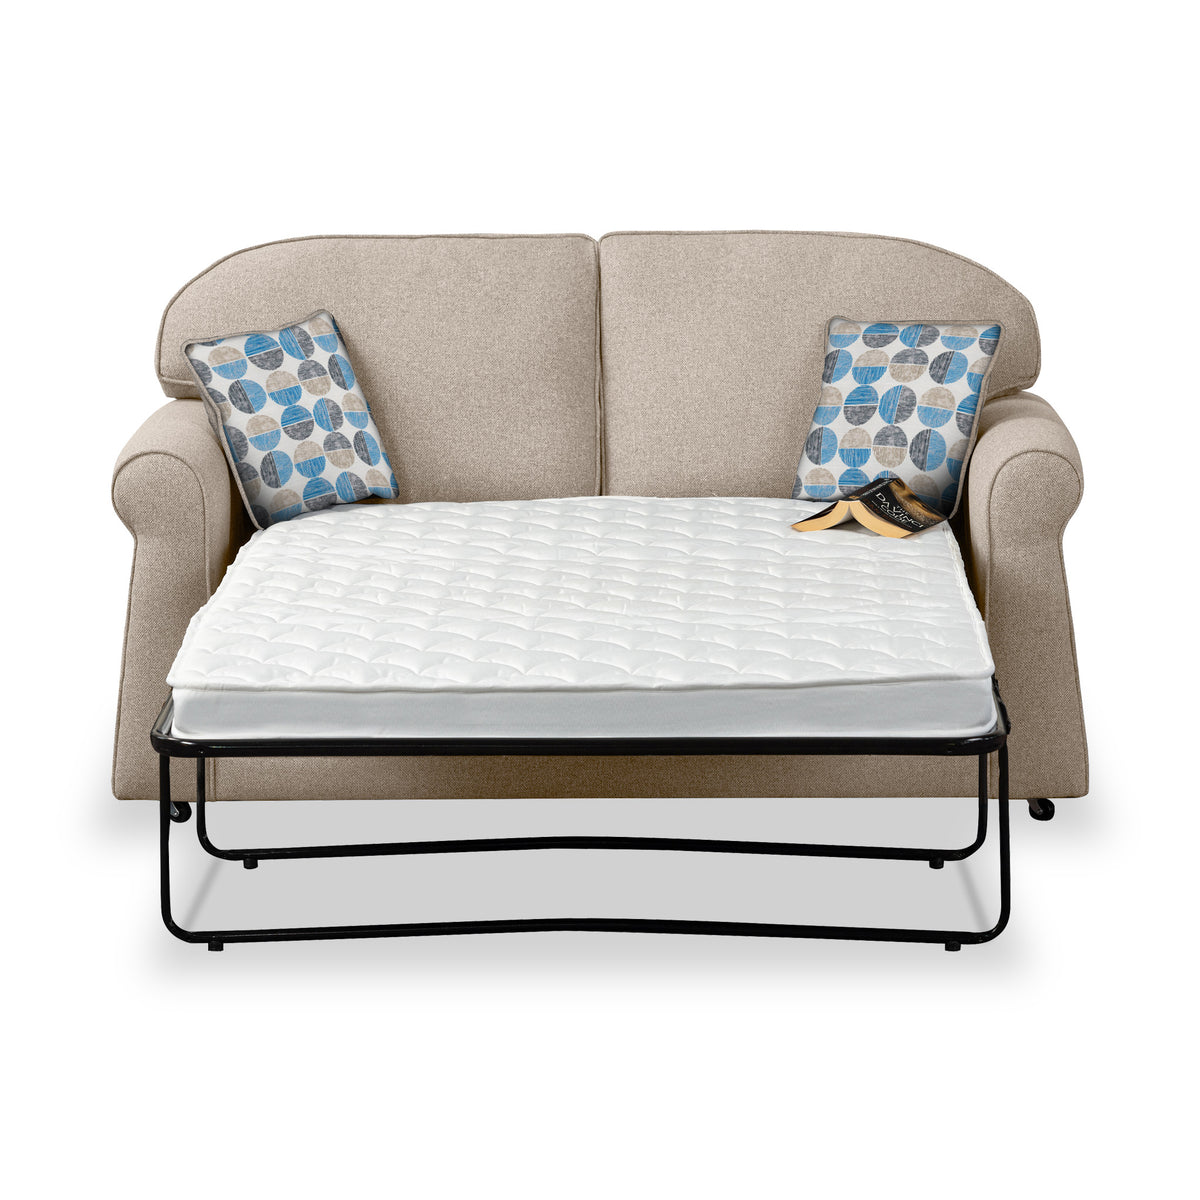 Giselle Fawn Soft Weave 2 Seater Sofabed with Blue Scatter Cushions from Roseland Furniture